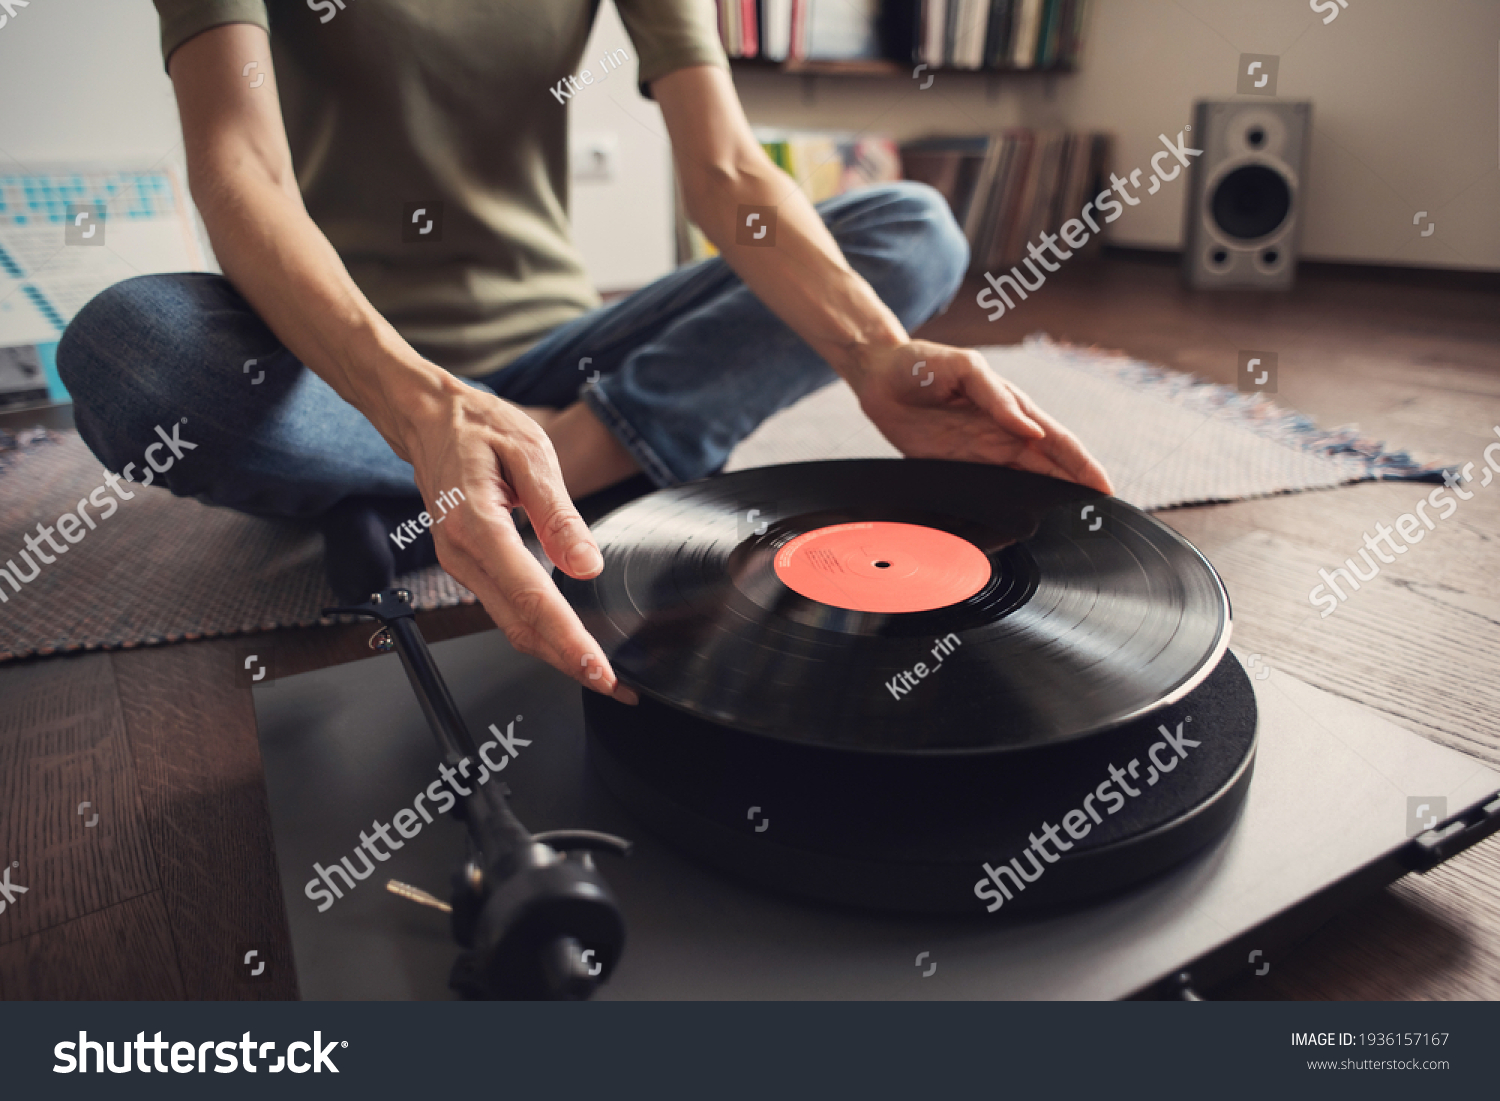 Woman listening to music, relaxing, enjoying life, having fun on home party. Turntable playing vinyl LP record. Leisure, lockdown, retro revival, hobby, lifestyle concept #1936157167